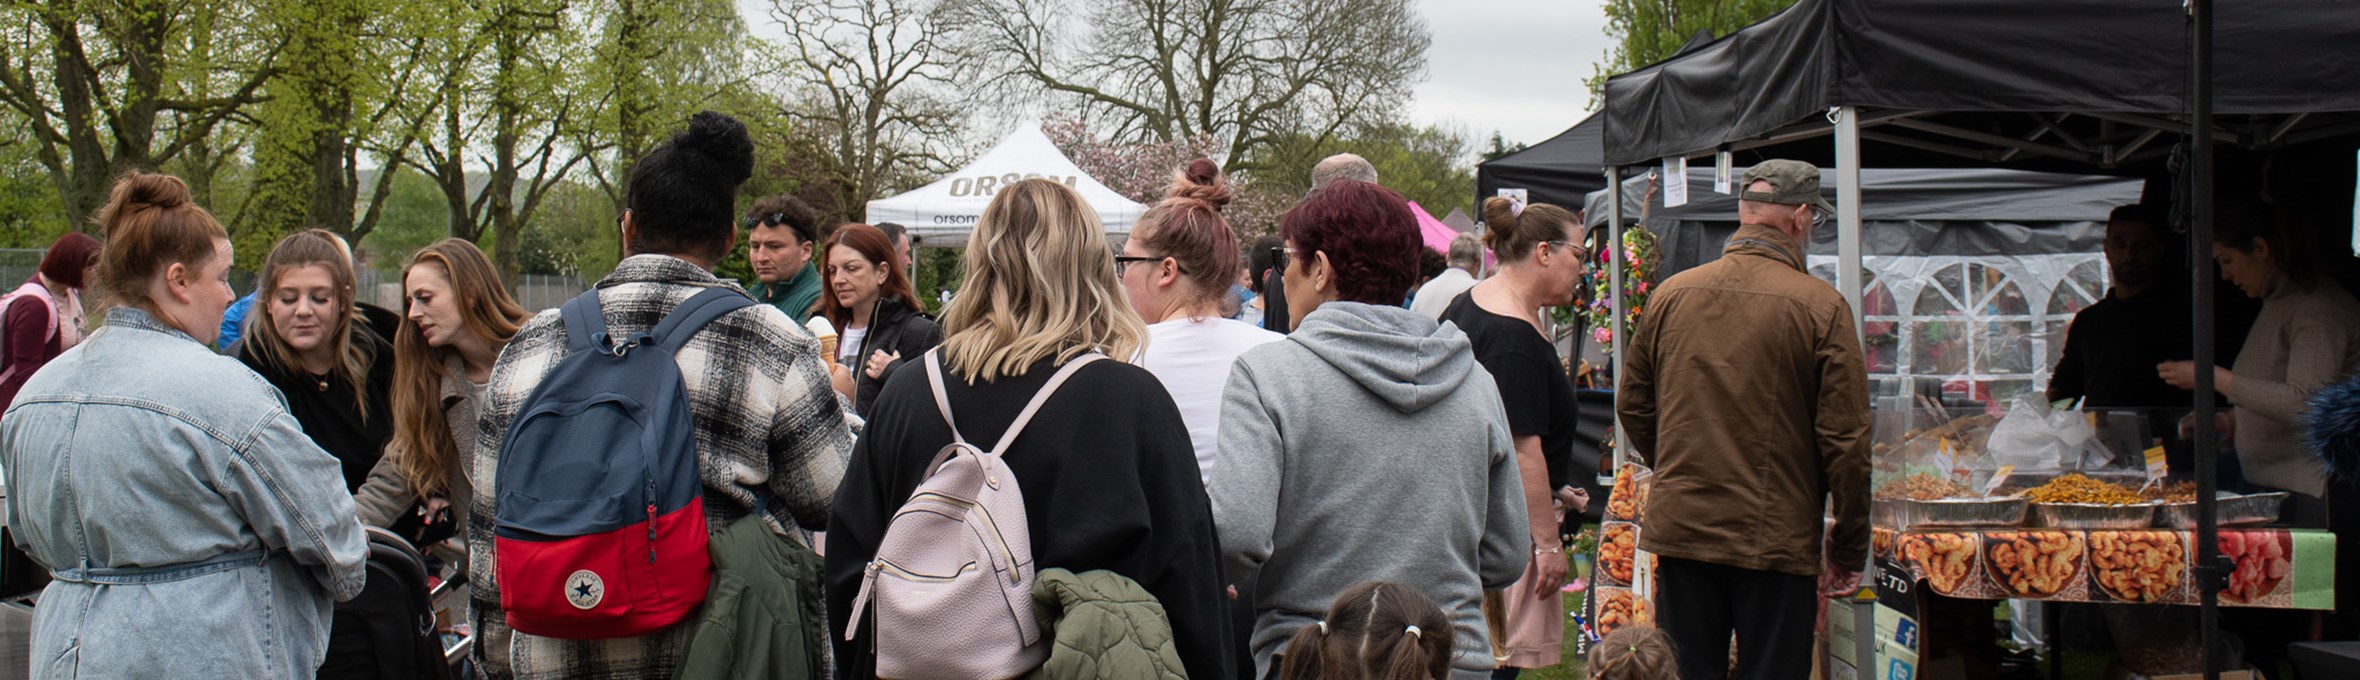 Visitors to an event on Titchfield Park